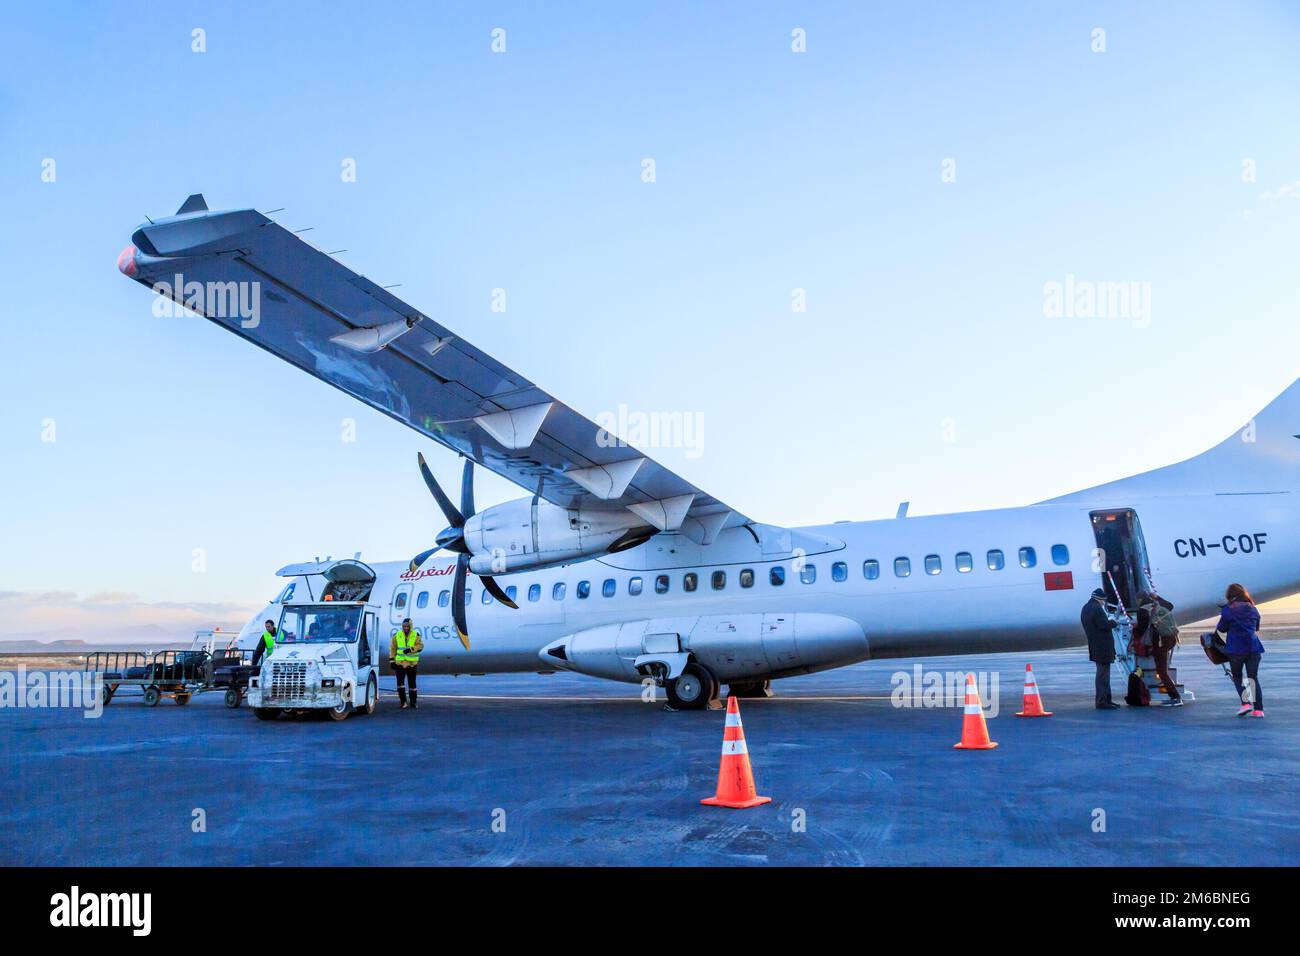 Ouarzazate, Morocco - Feb 28, 2016: agents of the airline charges passengers' luggages in the hold of the airliner while the pas Stock Photo